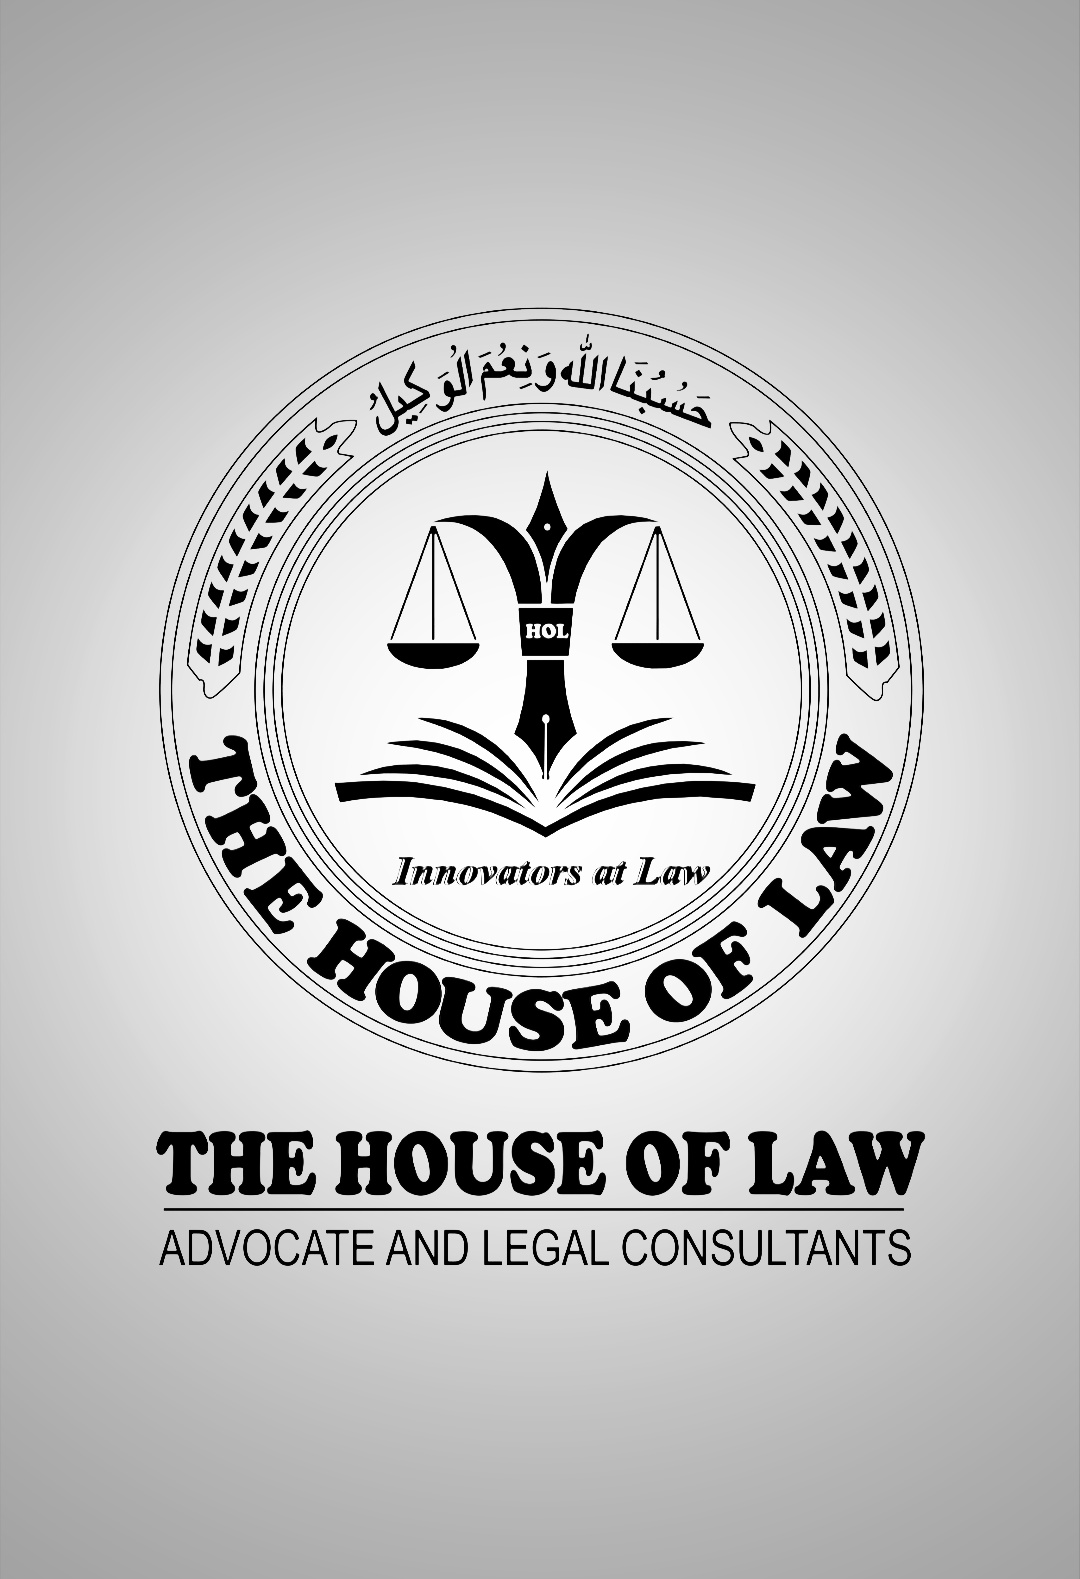 The House of Law